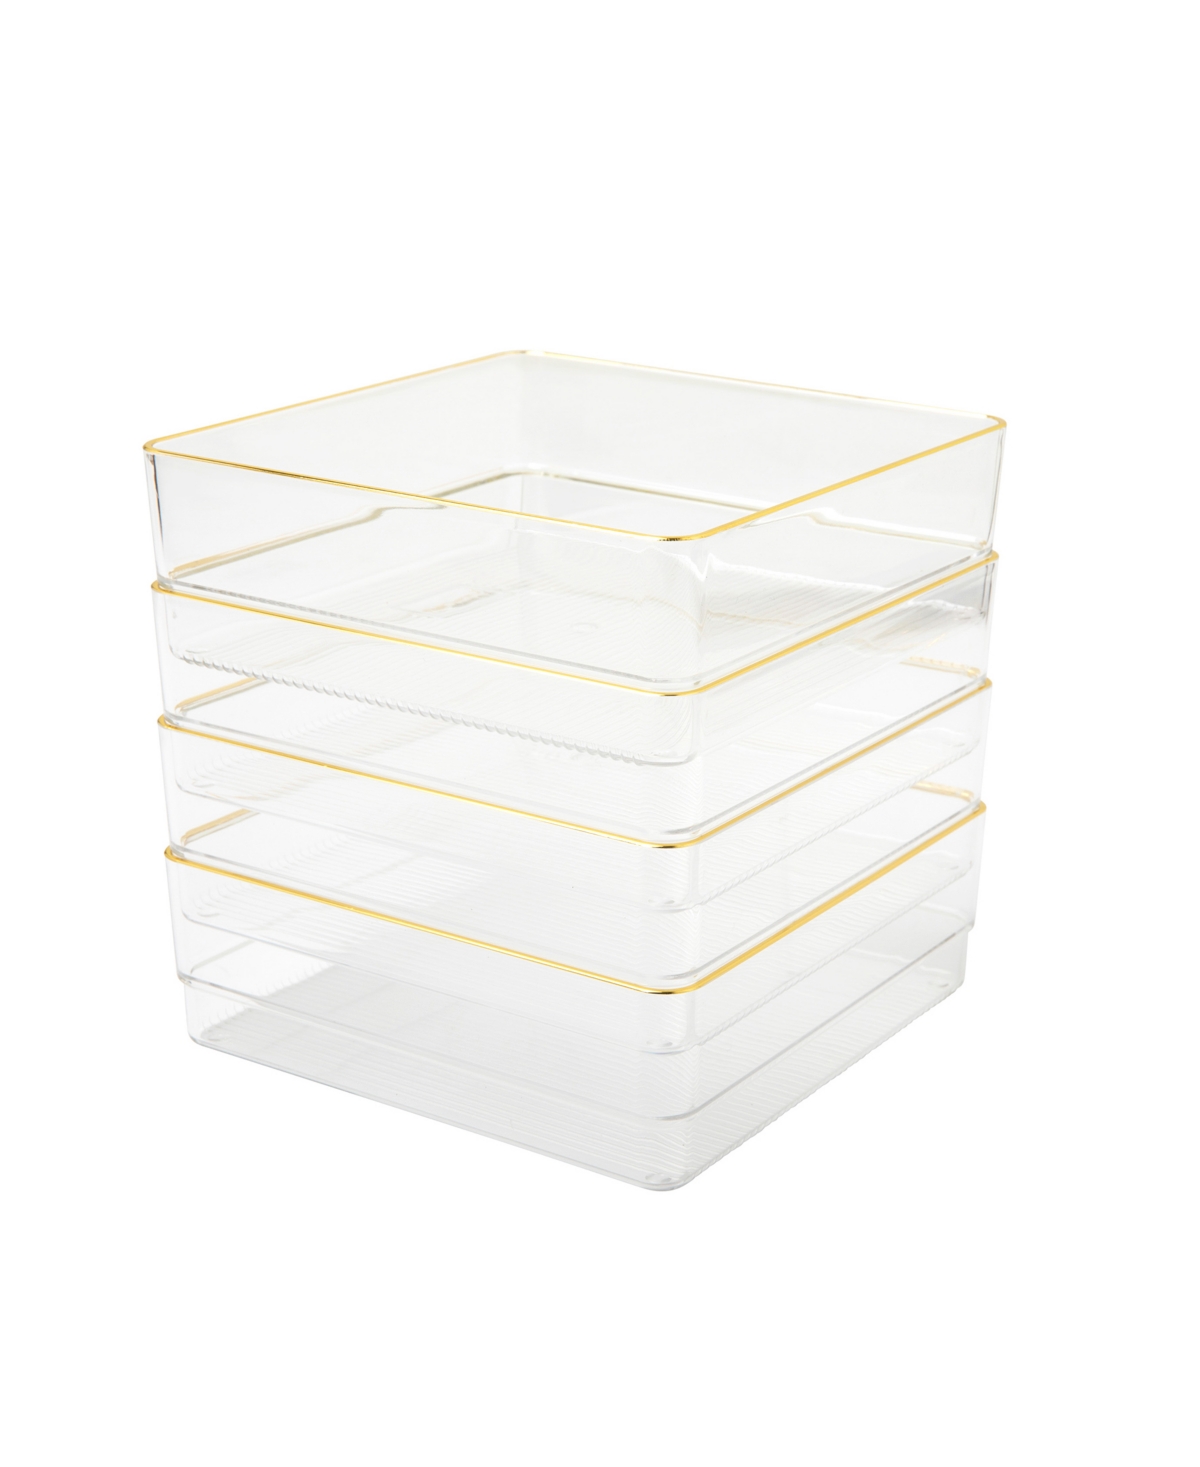 Kerry 4 Piece Plastic Stackable Office Desk Drawer Organizers, 6" x 6" - Clear, Gold Trim